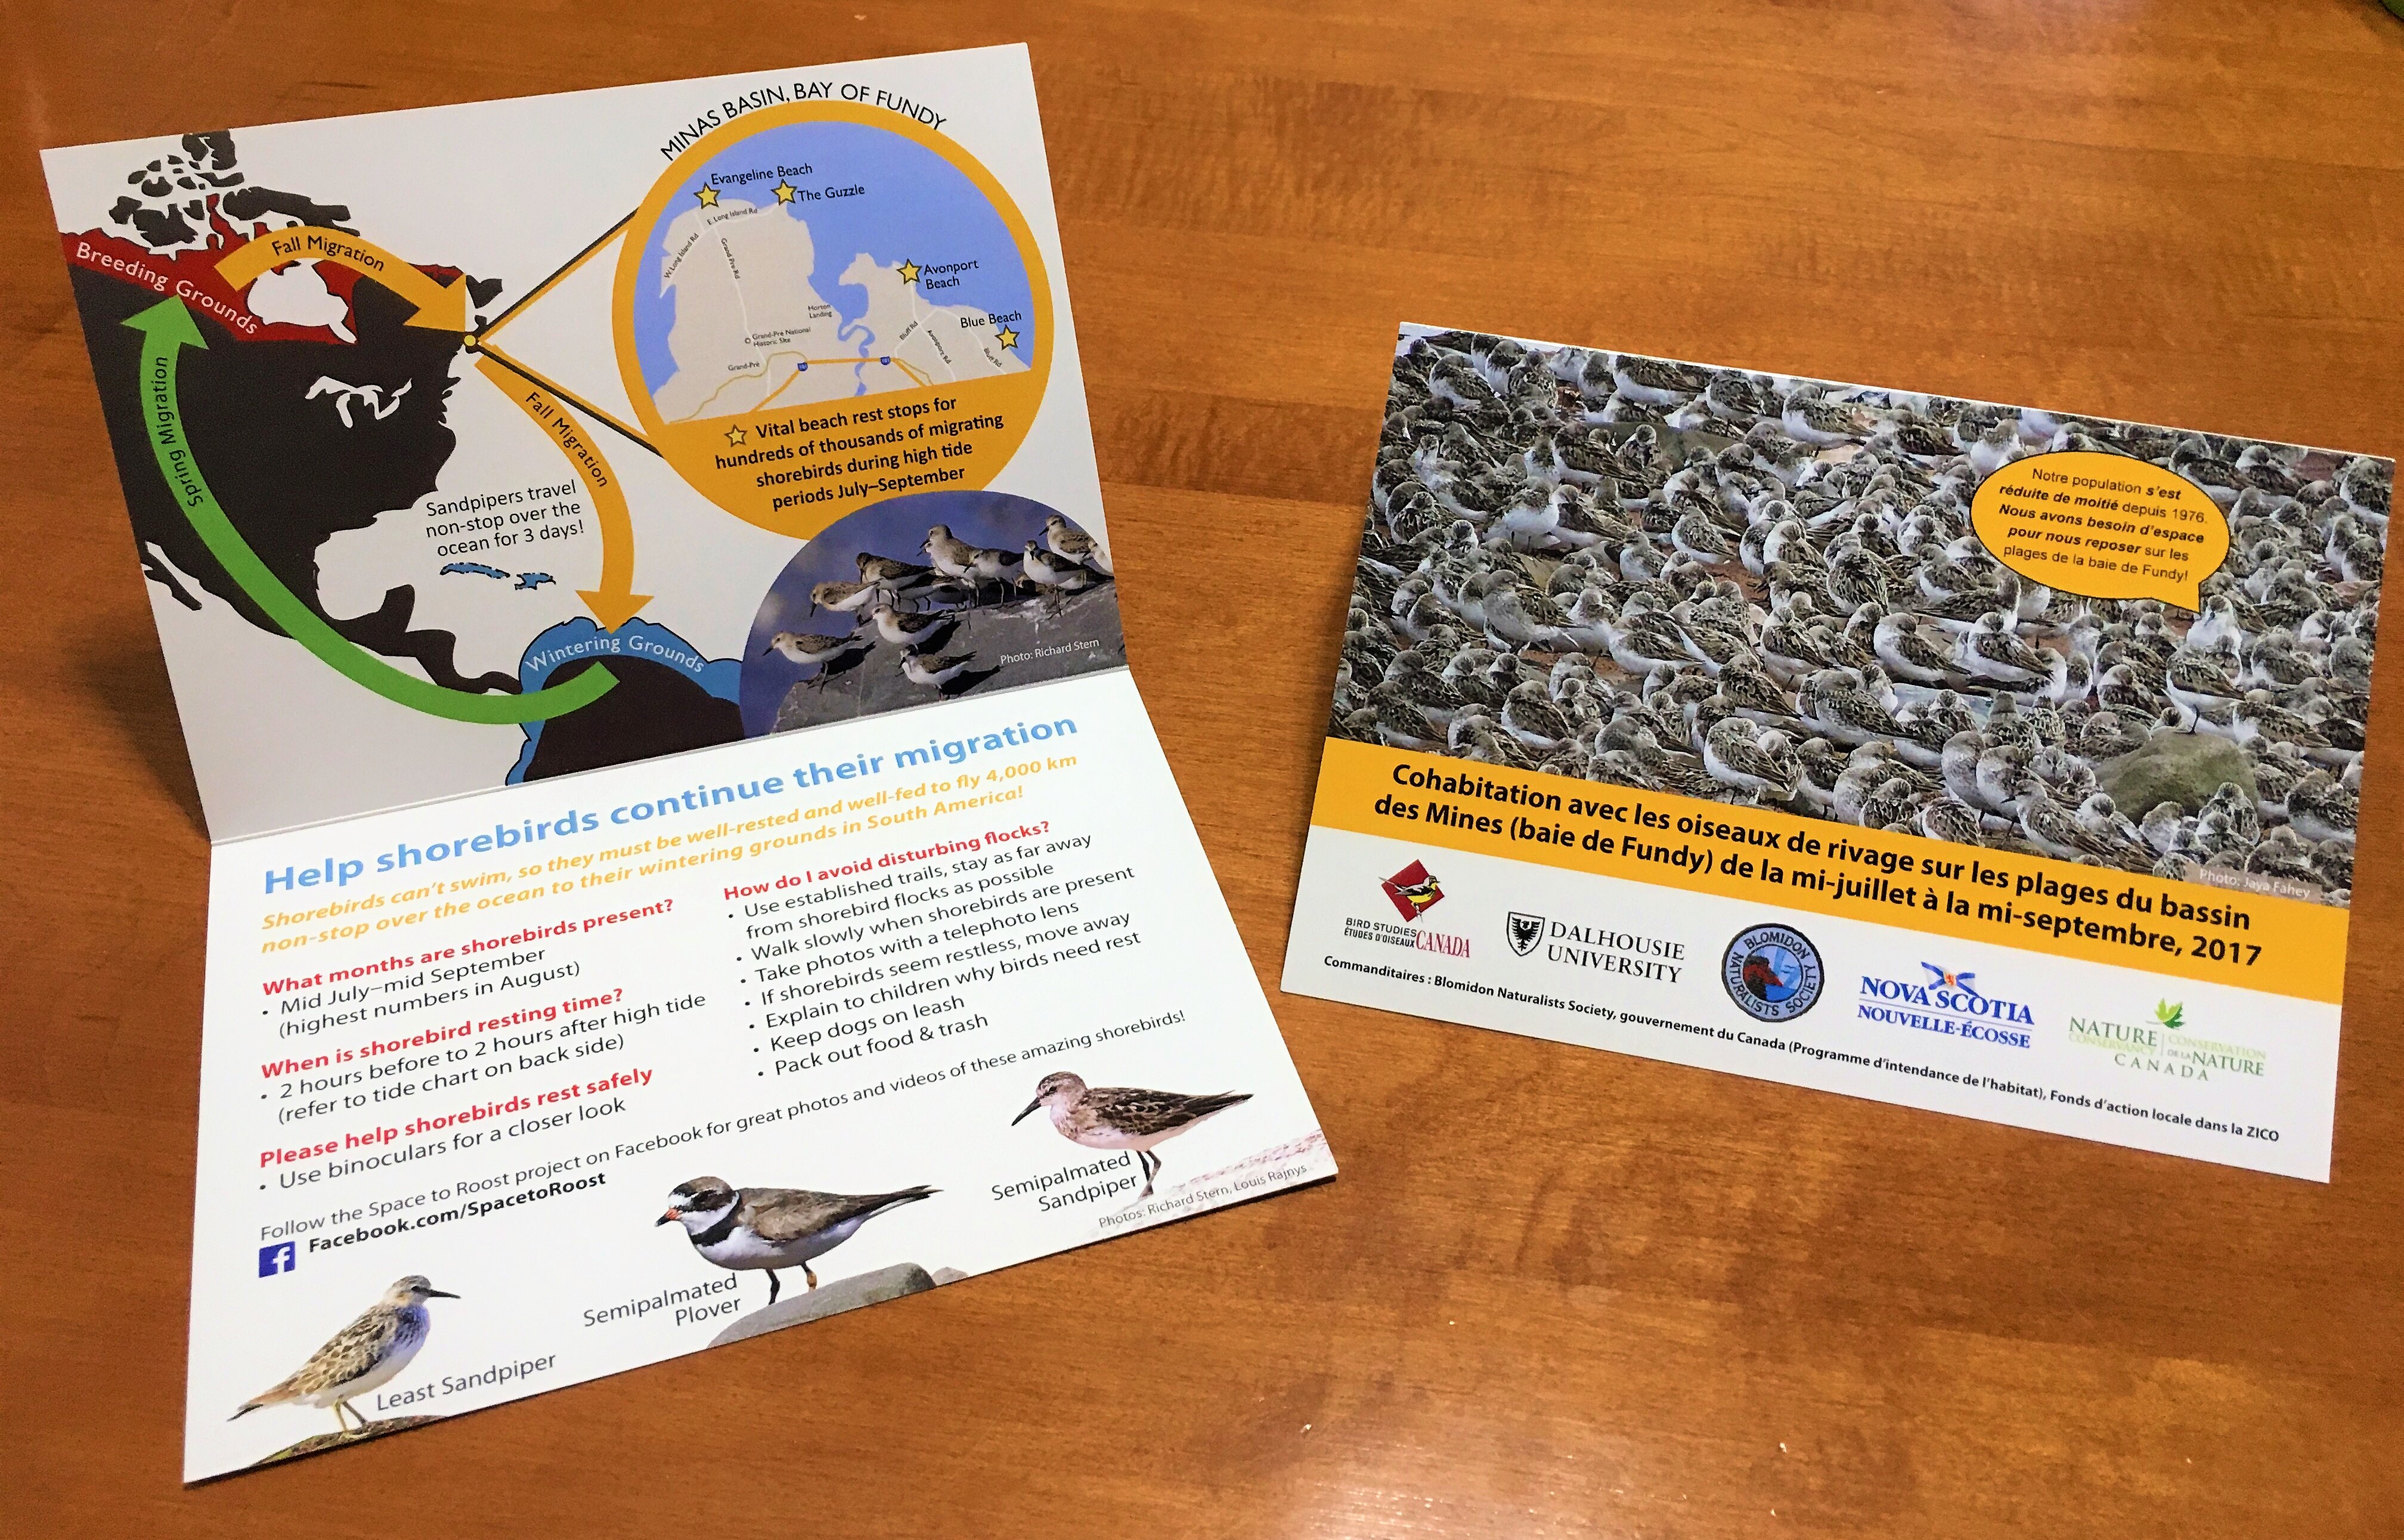 Bilingual material about making space for shorebirds to rest this migration season.